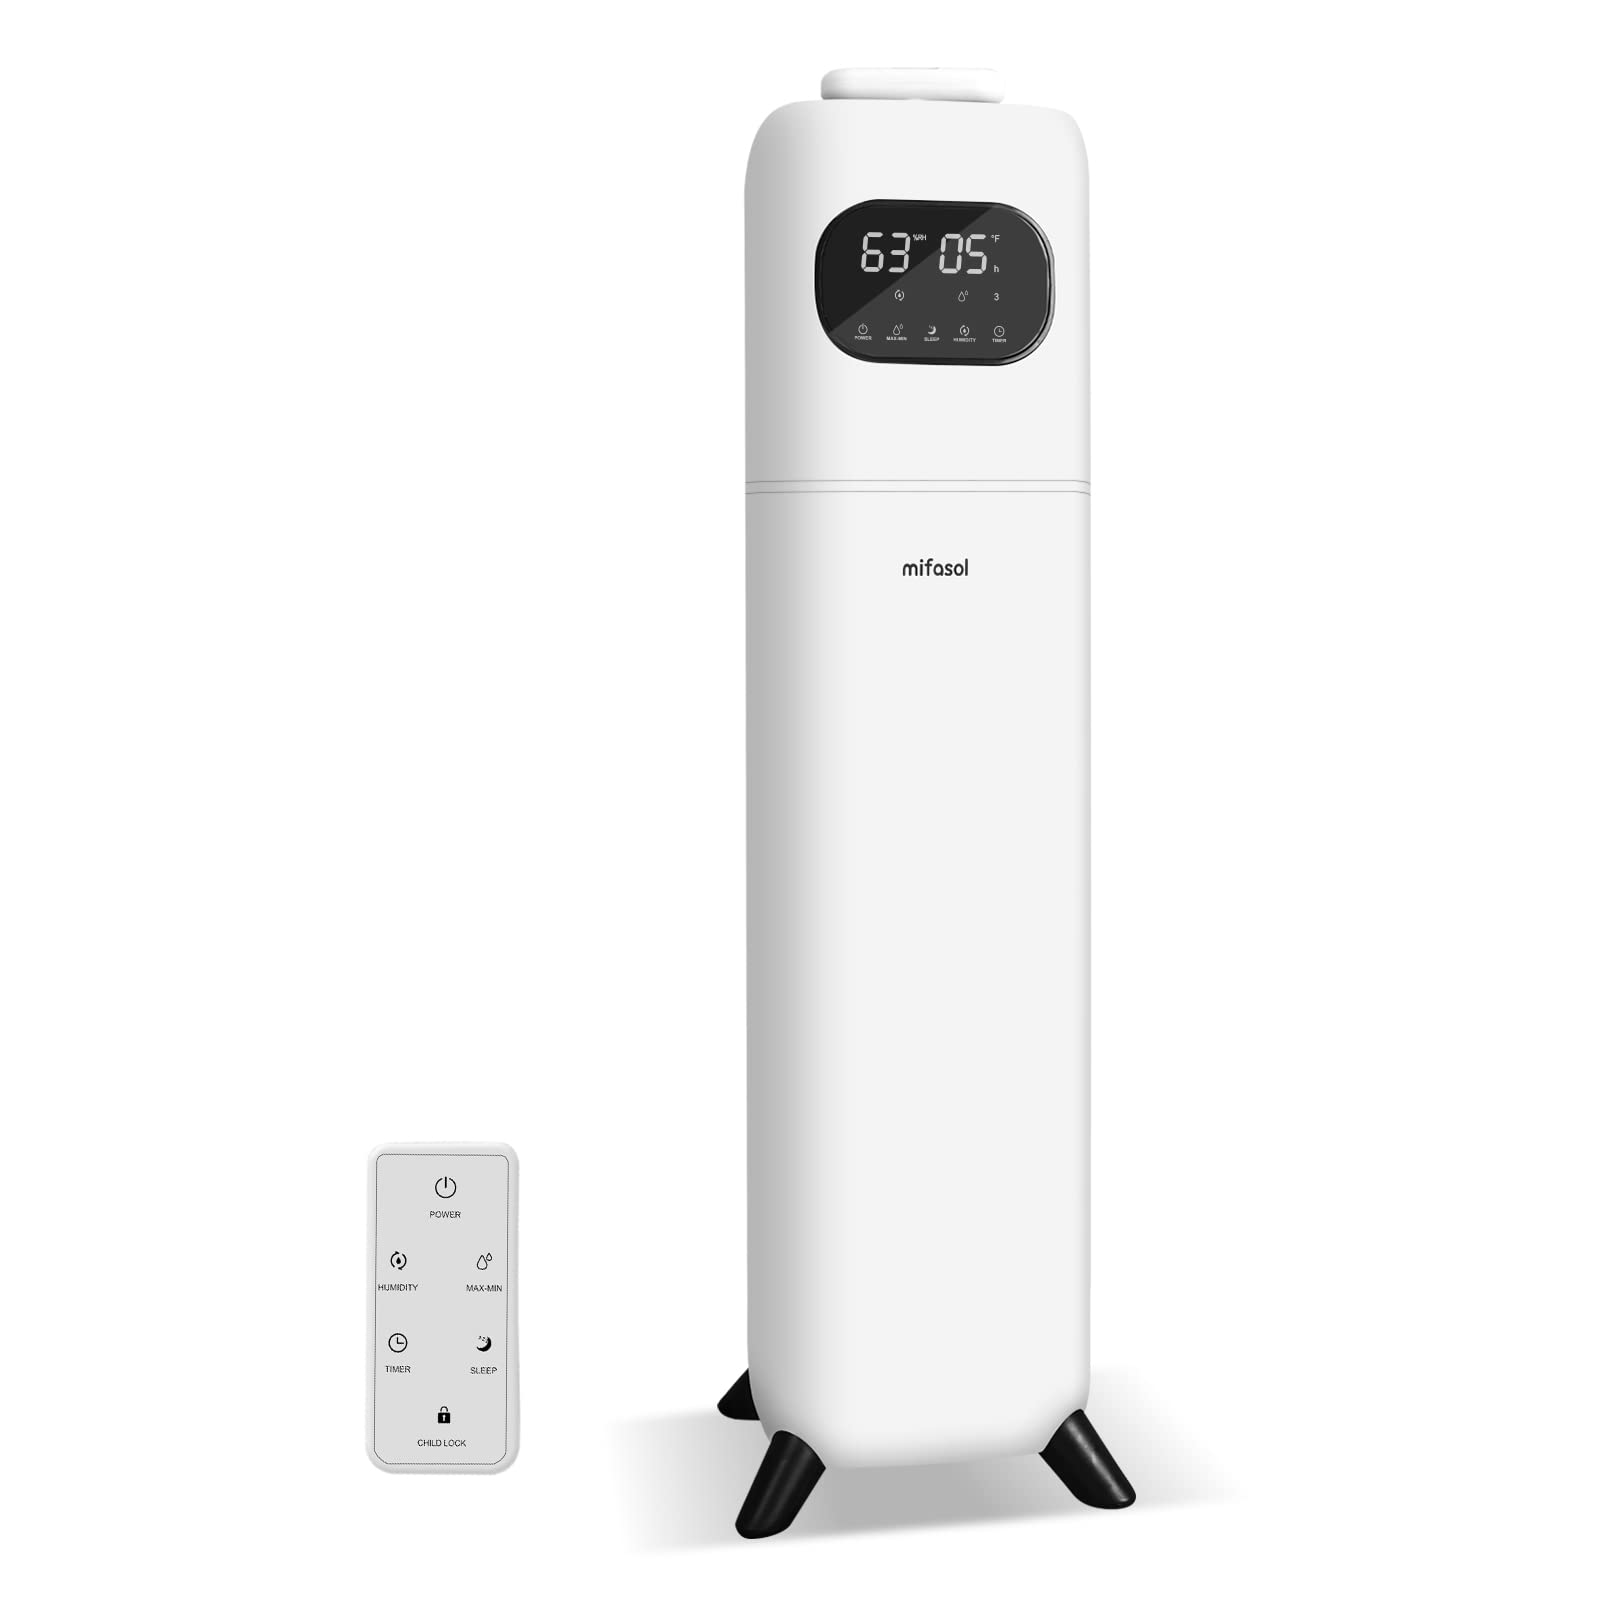 [LCD-2102]2.3gal/9LHumidifiers for Bedroom Large Room, Quiet Humidifiers for Bedroom with Timer, 360°Nozzle, Aroma Box, 3 Speed Ultrasonic Cool Mist Humidifier with Humidistat for Baby Nursery Yoga Plants